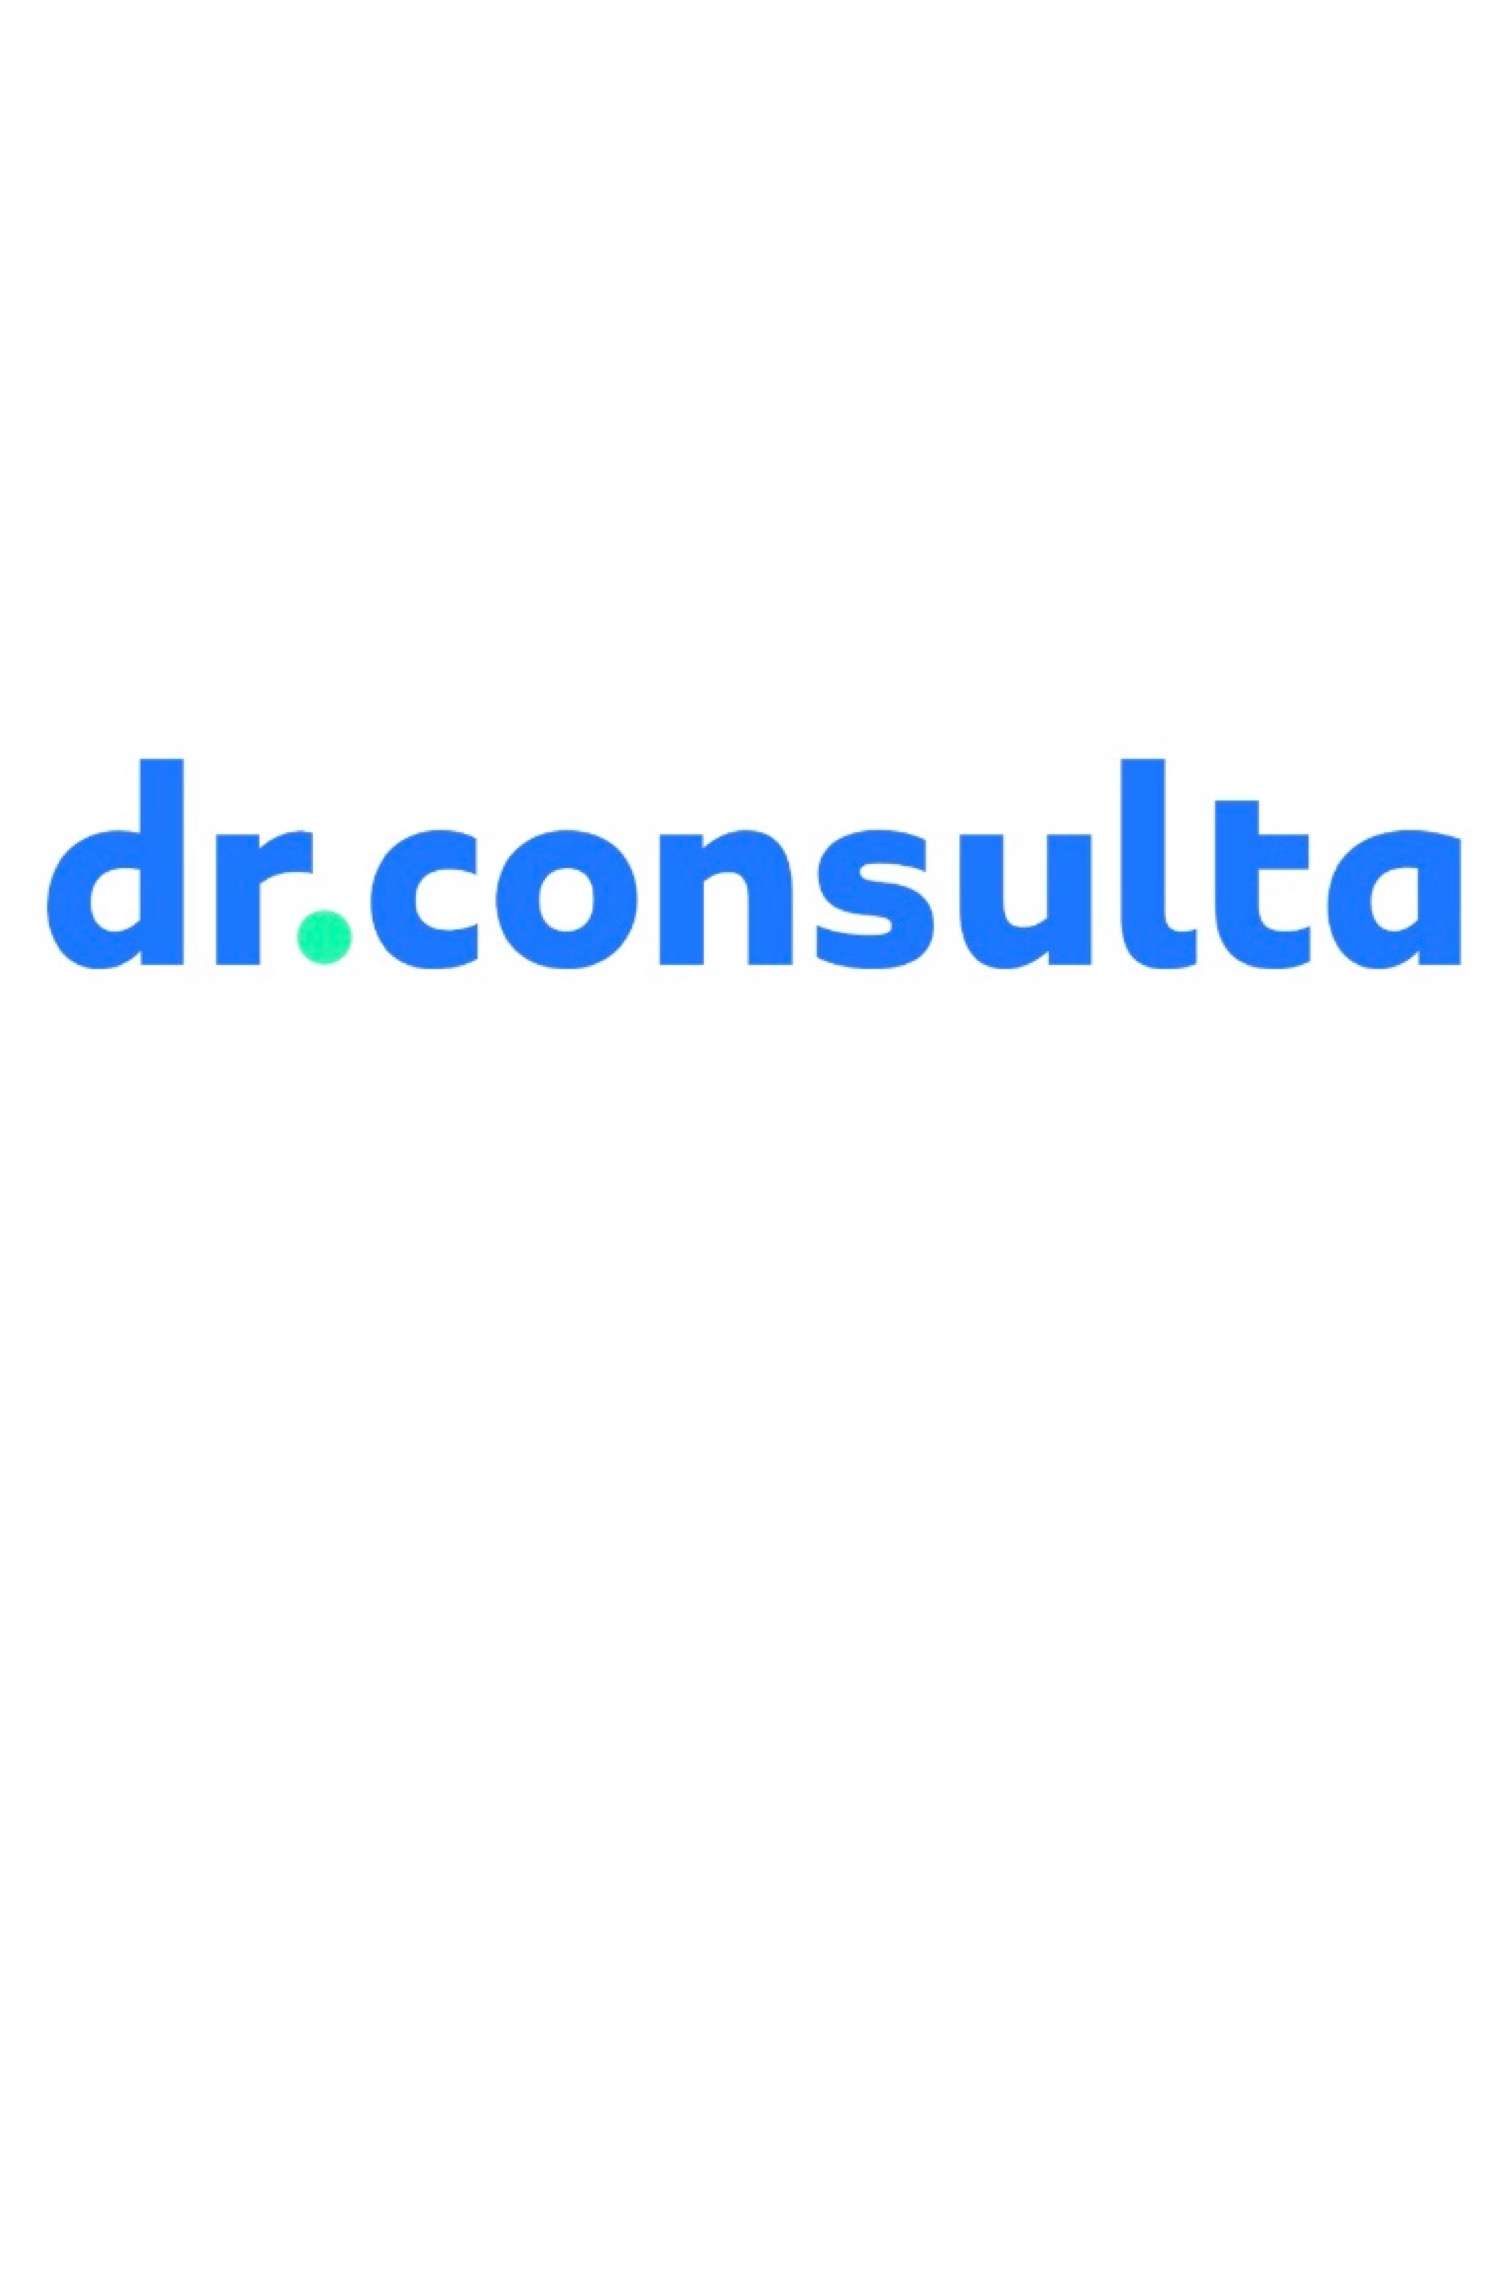 Using tech and $100M, Dr Consulta transforms healthcare for the poorest